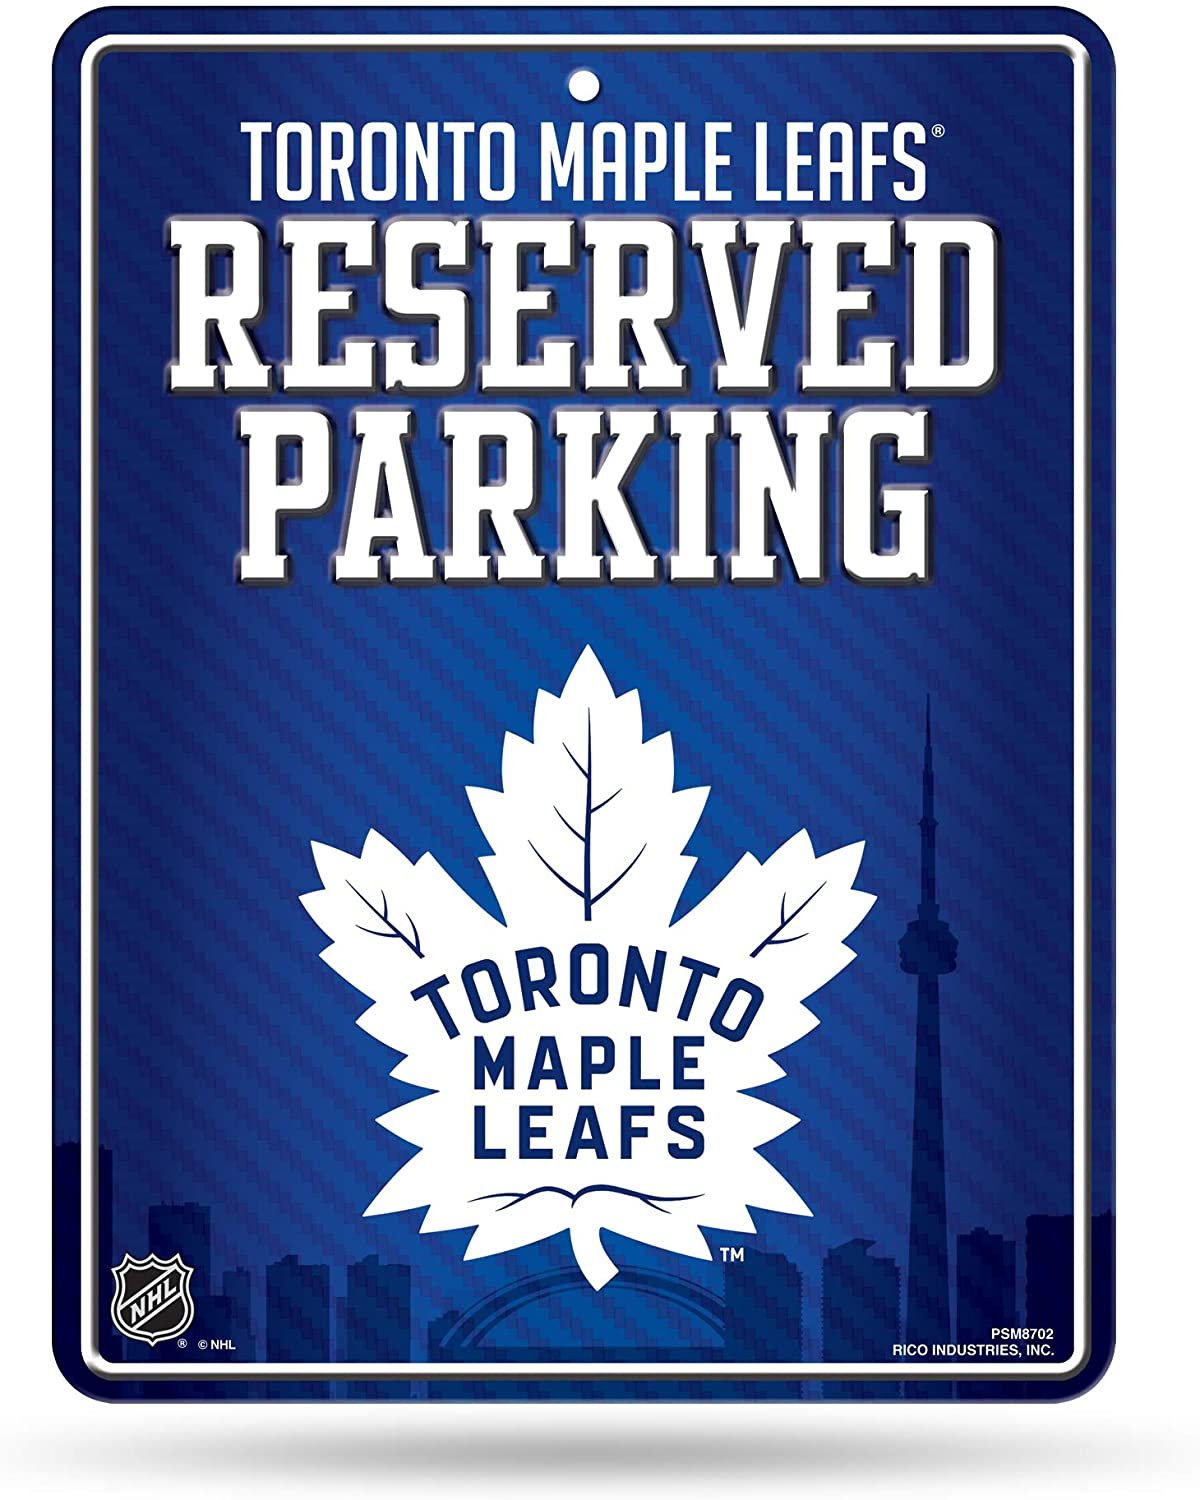 Toronto Maple Leafs 8-Inch by 11-Inch Metal Parking Sign Décor